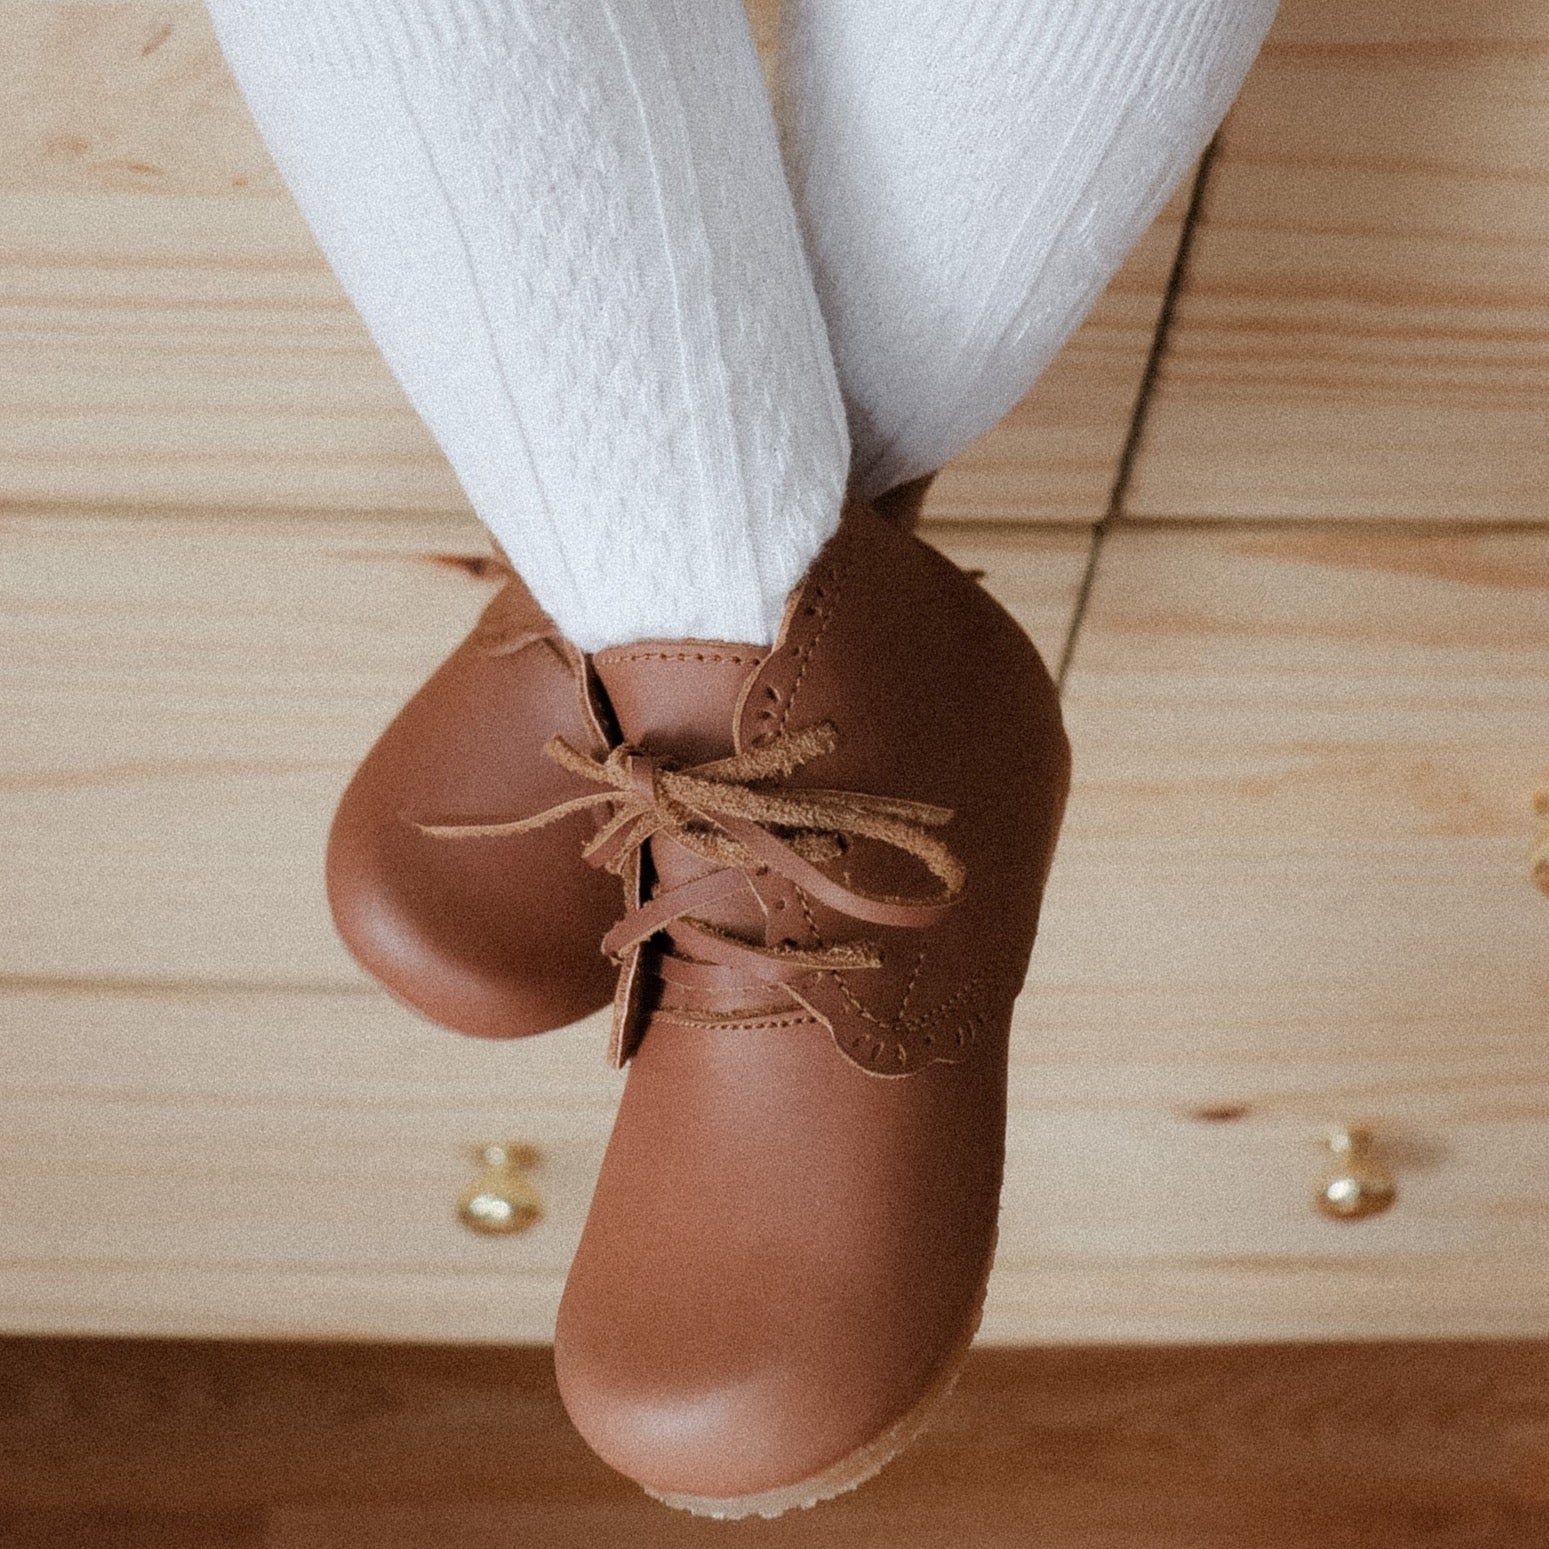 Adelisa &amp; Co handmade leather Primavera boots in a medium brown tone. These leather children&#39;s boots feature beautiful scallop edging and subtle floral details.